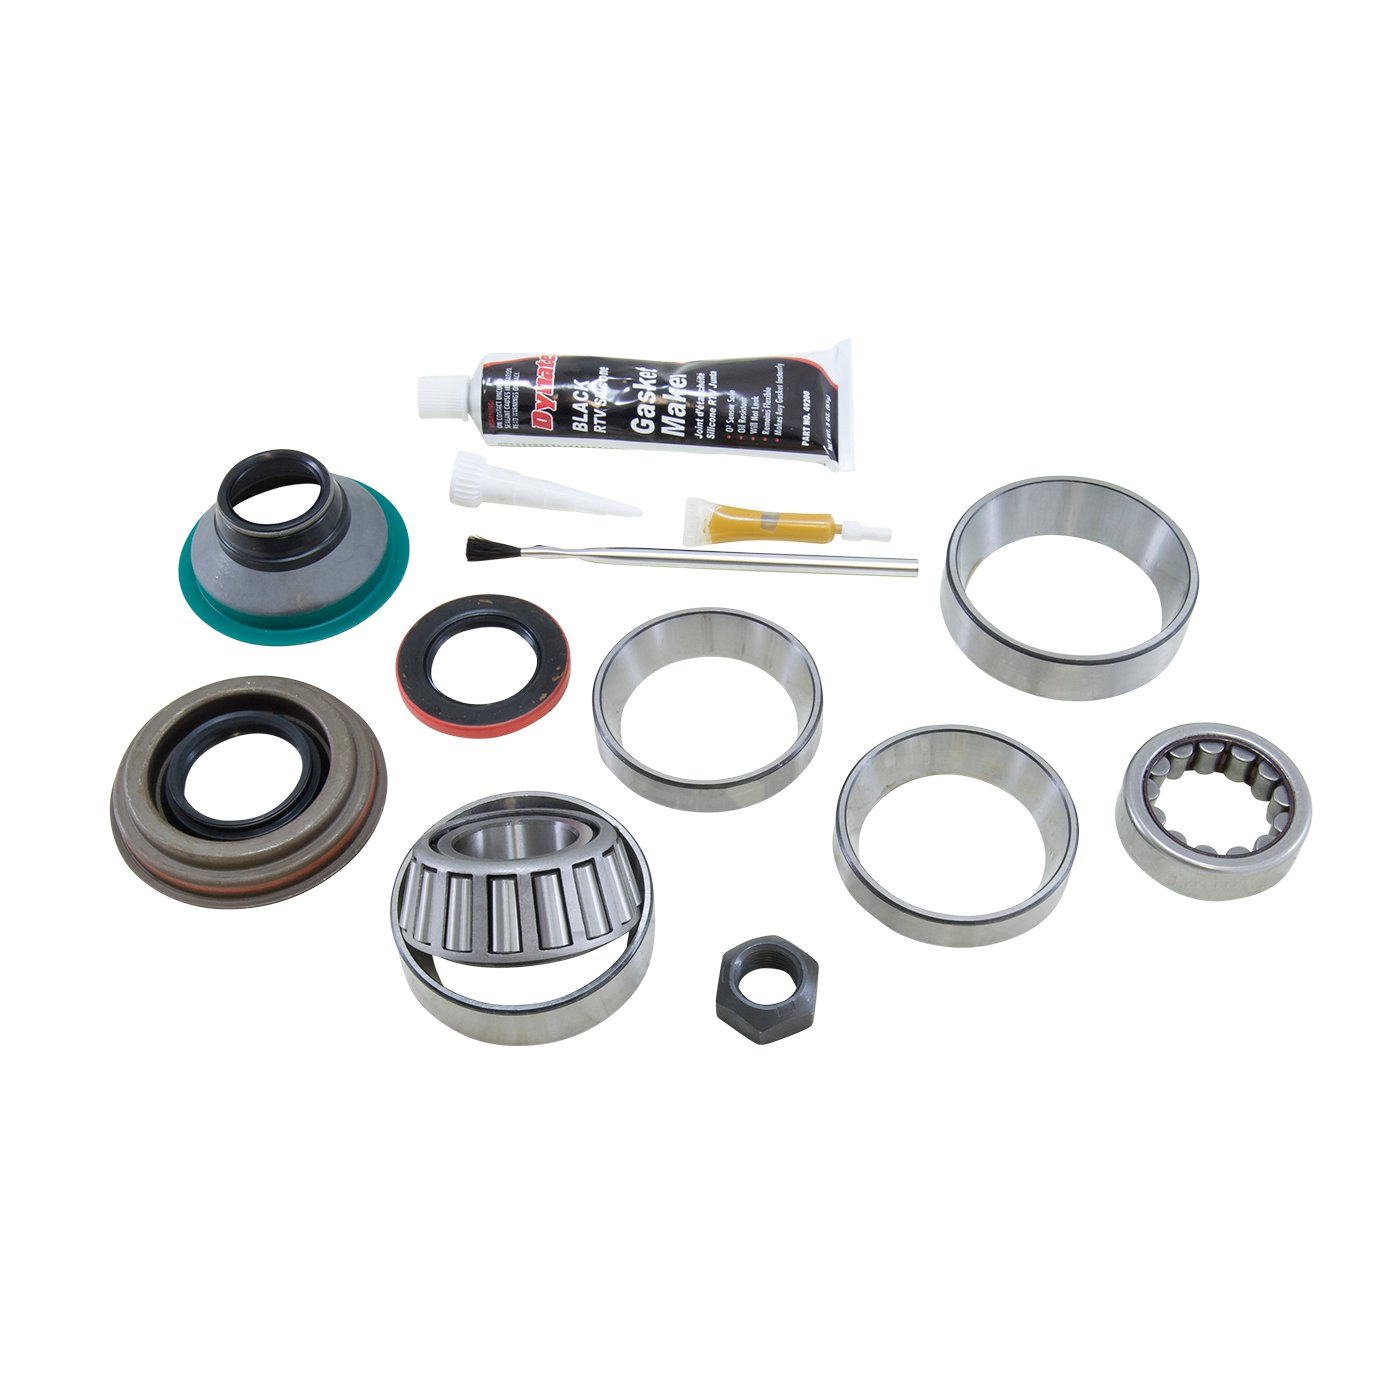 Front Bearing Installation Kit For Dana 44 Differential (Straight Axle) Includes: